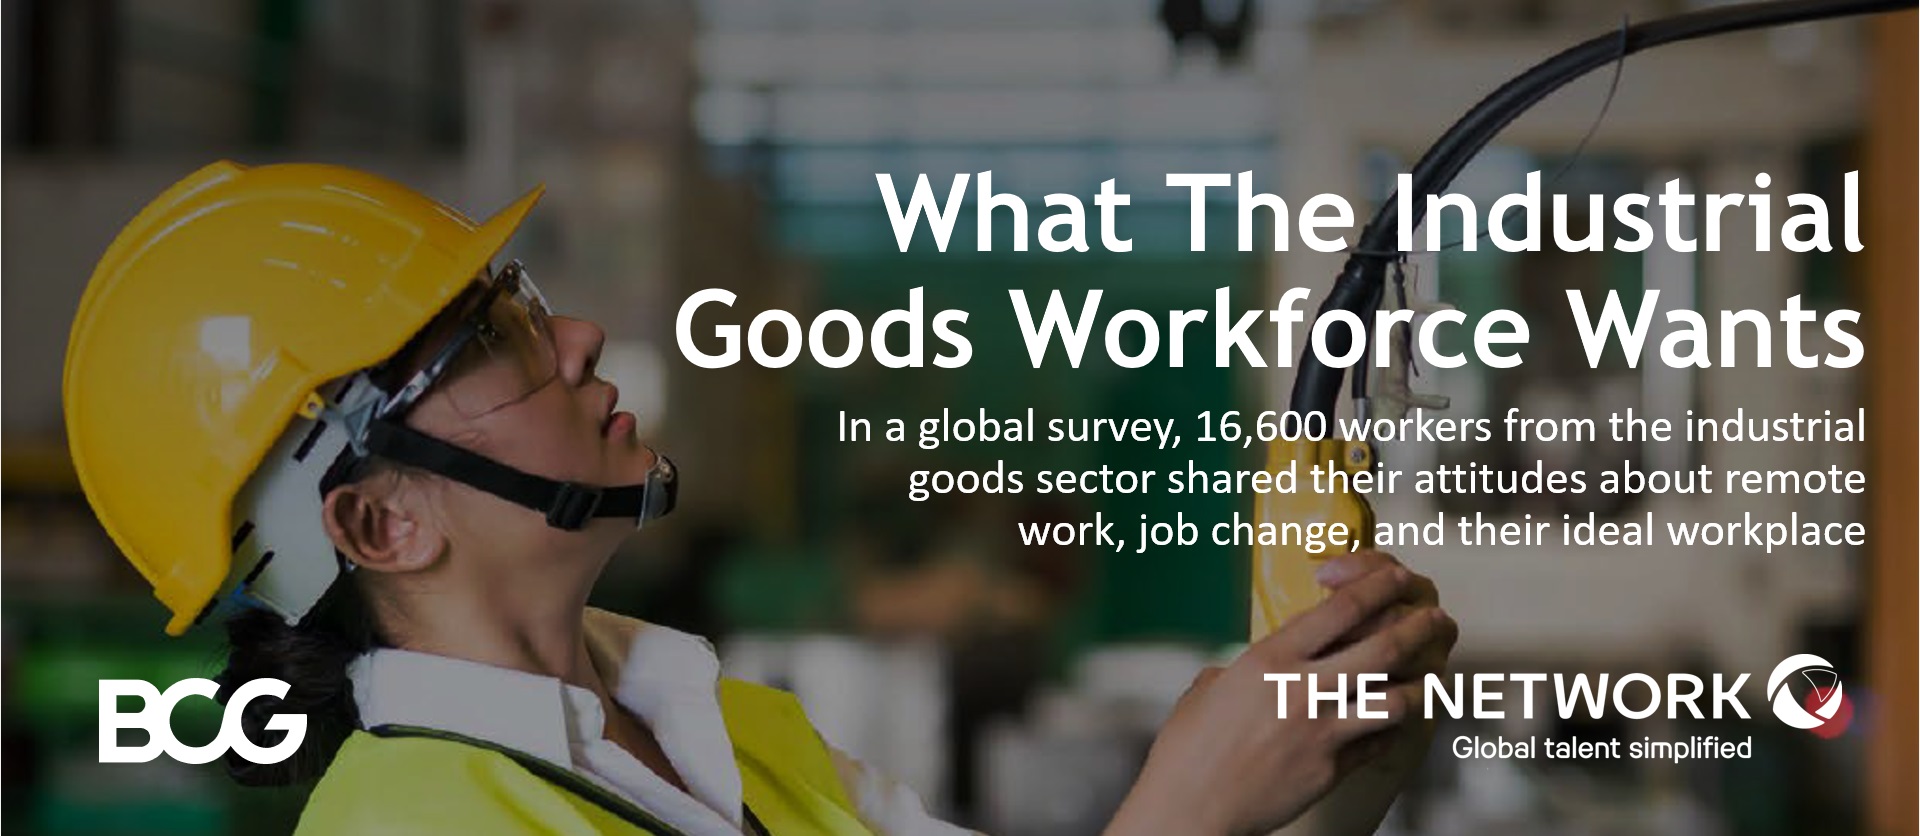 What the Industrial Goods Workforce Wants